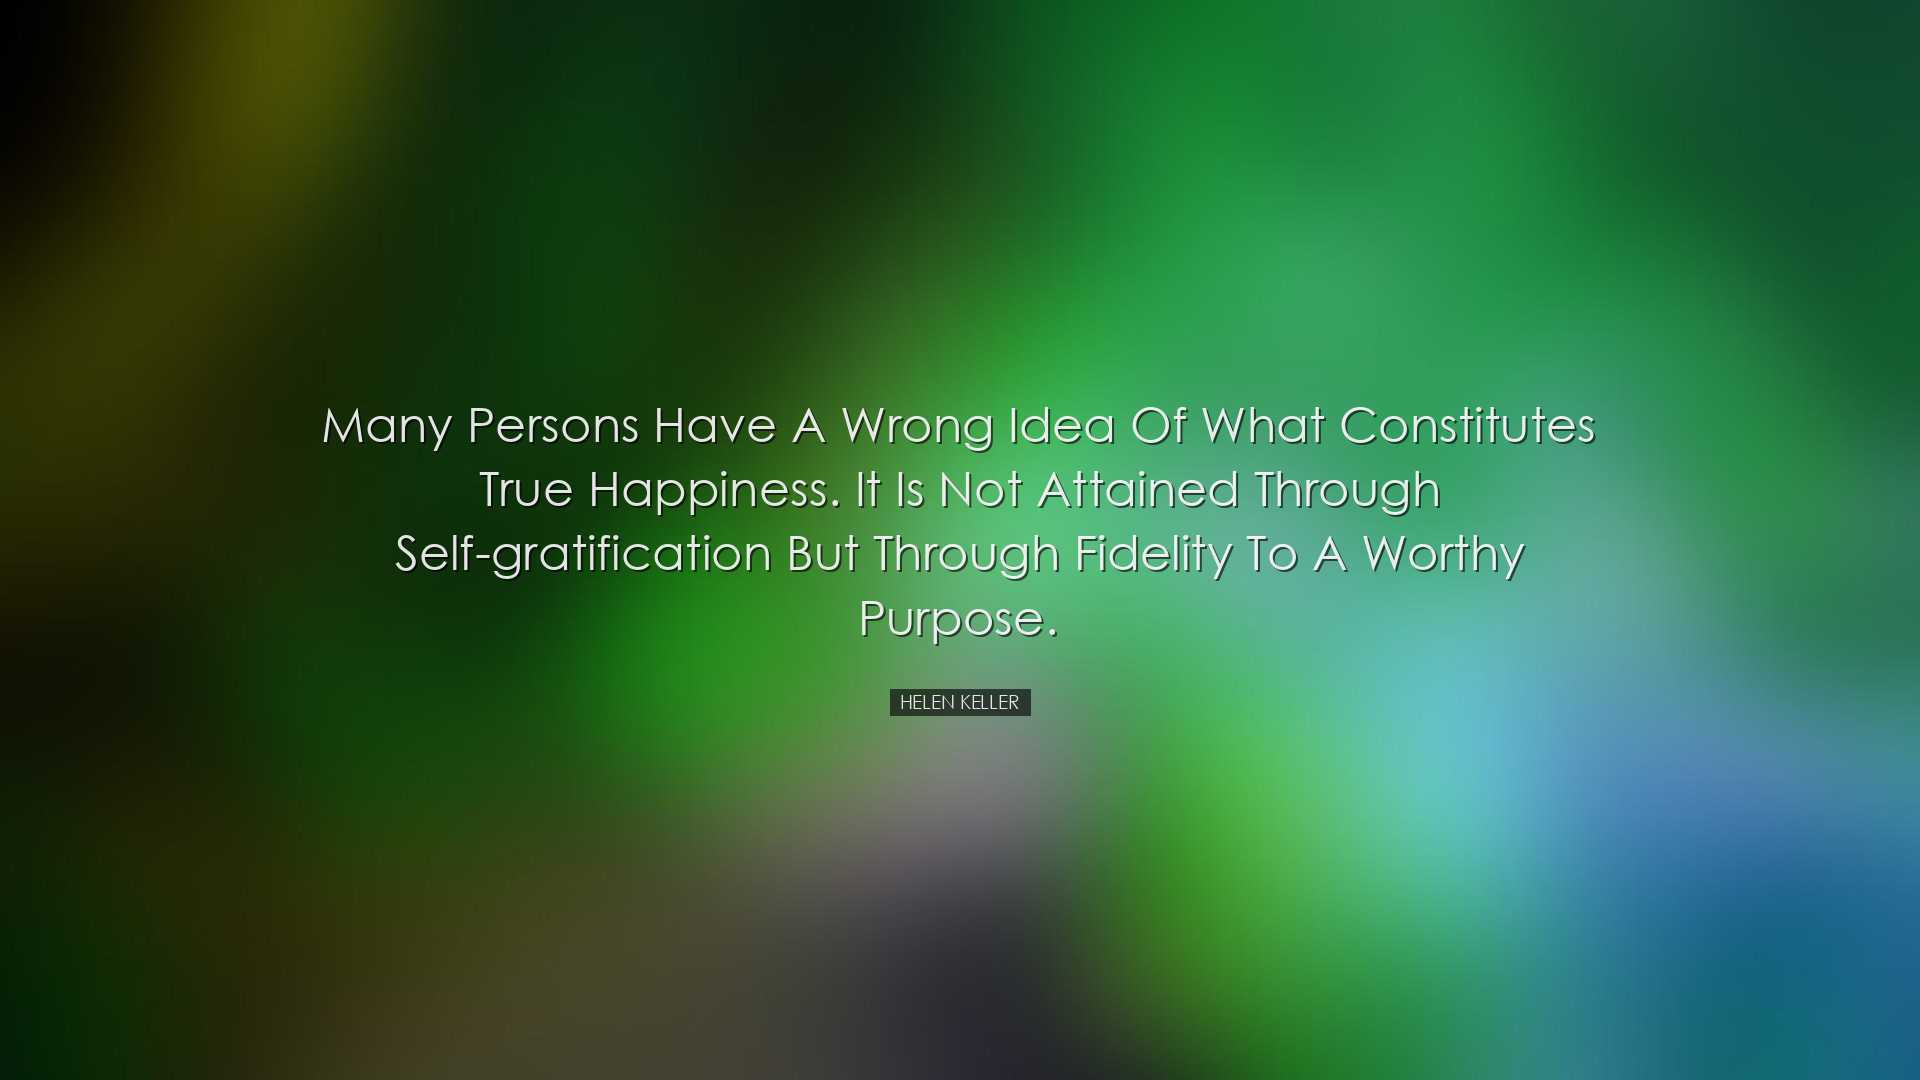 Many persons have a wrong idea of what constitutes true happiness.